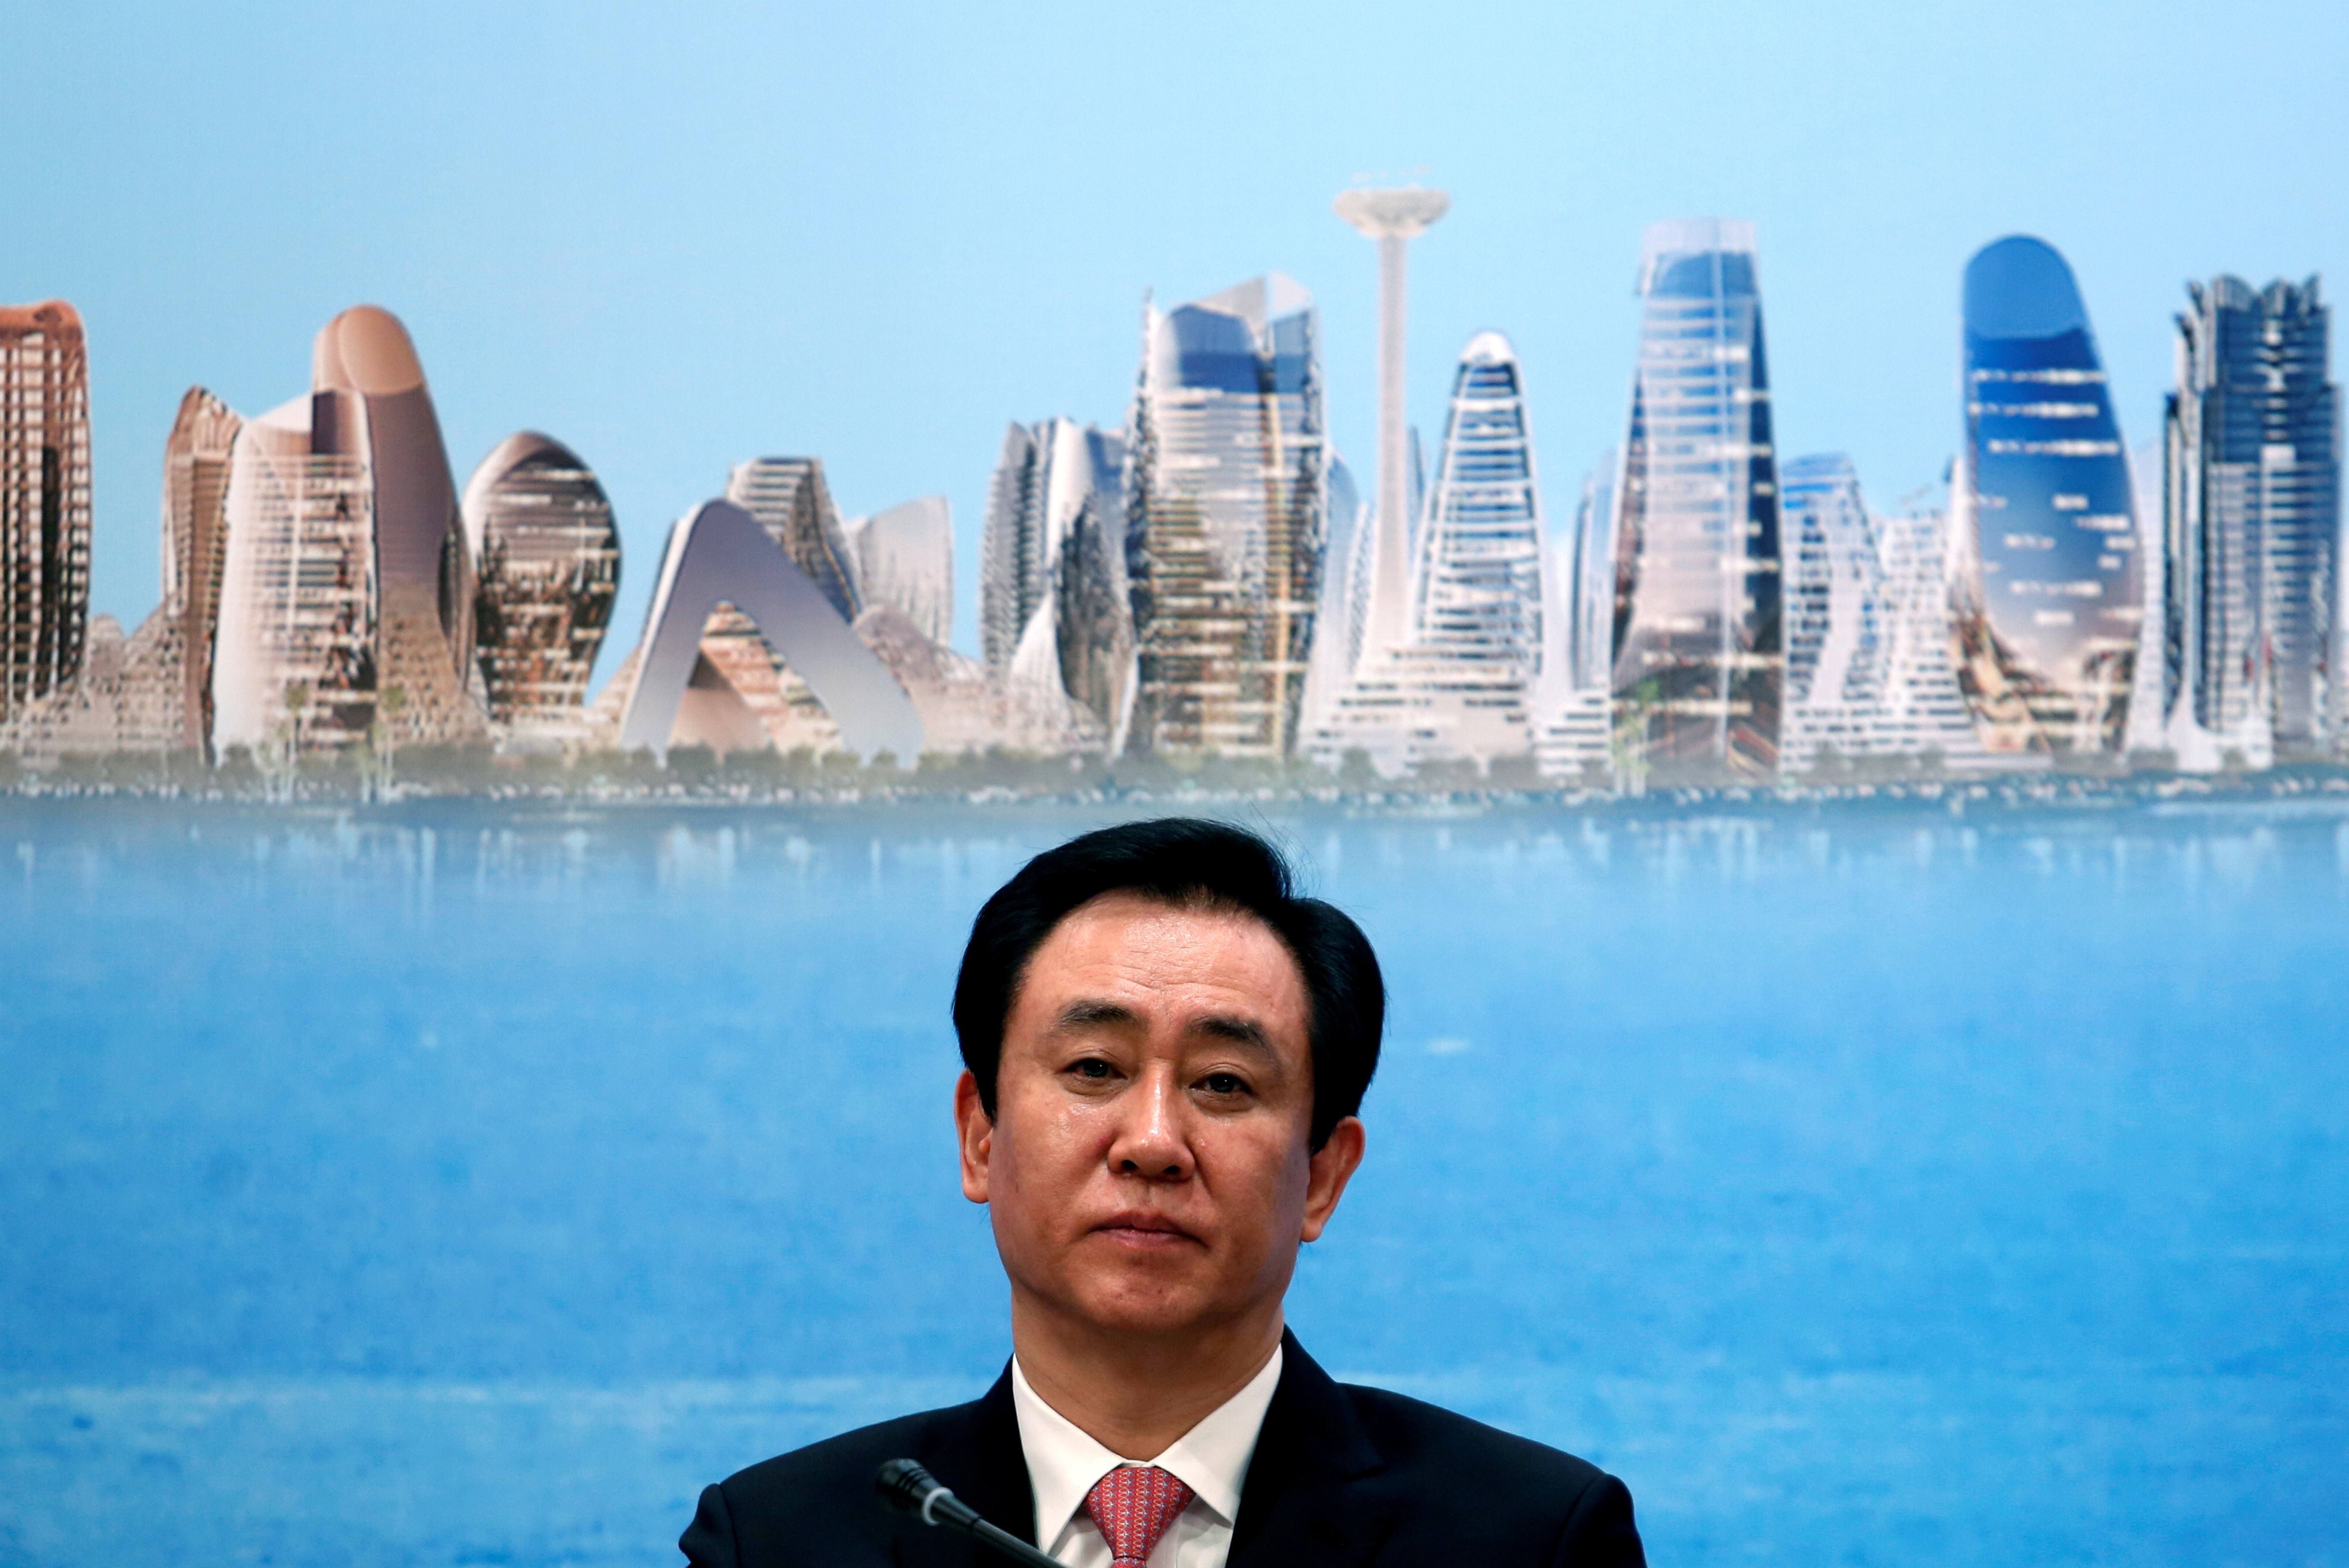 China Evergrande Group Chairman Hui Ka Yan attends a news conference on the property developer's annual results in Hong Kong